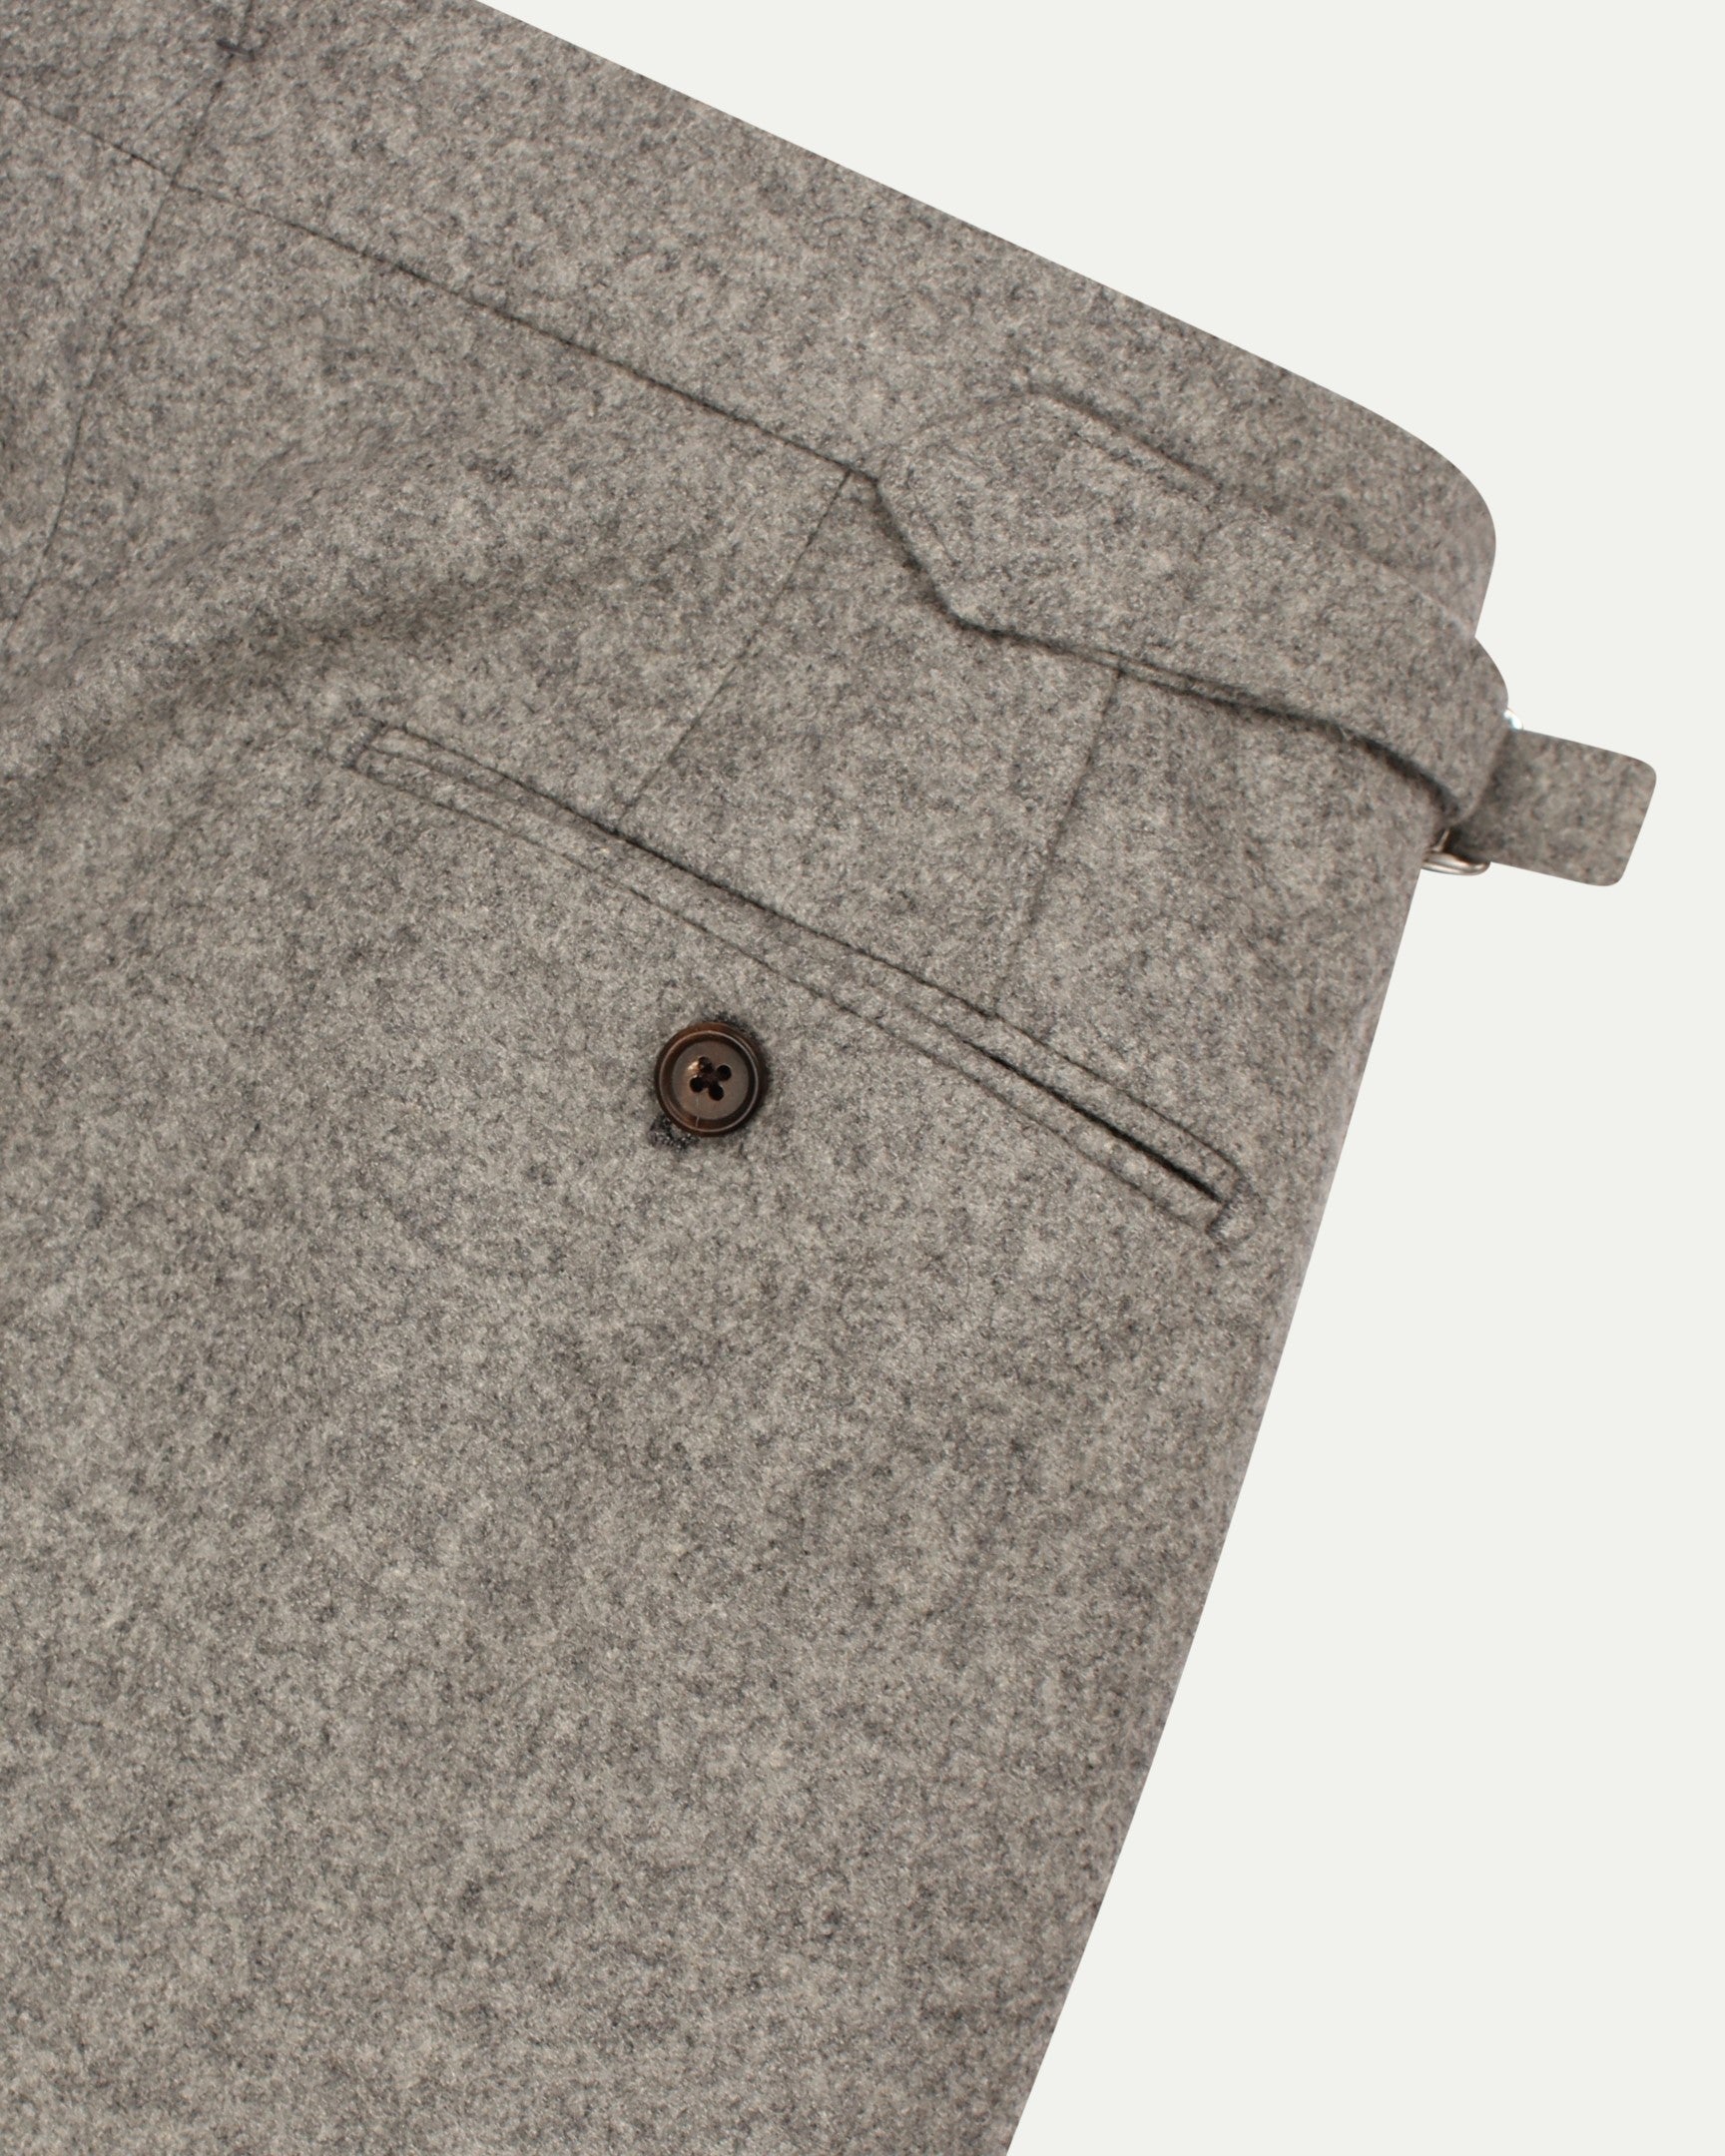 Made-To-Order Trousers in Light Grey Flannel